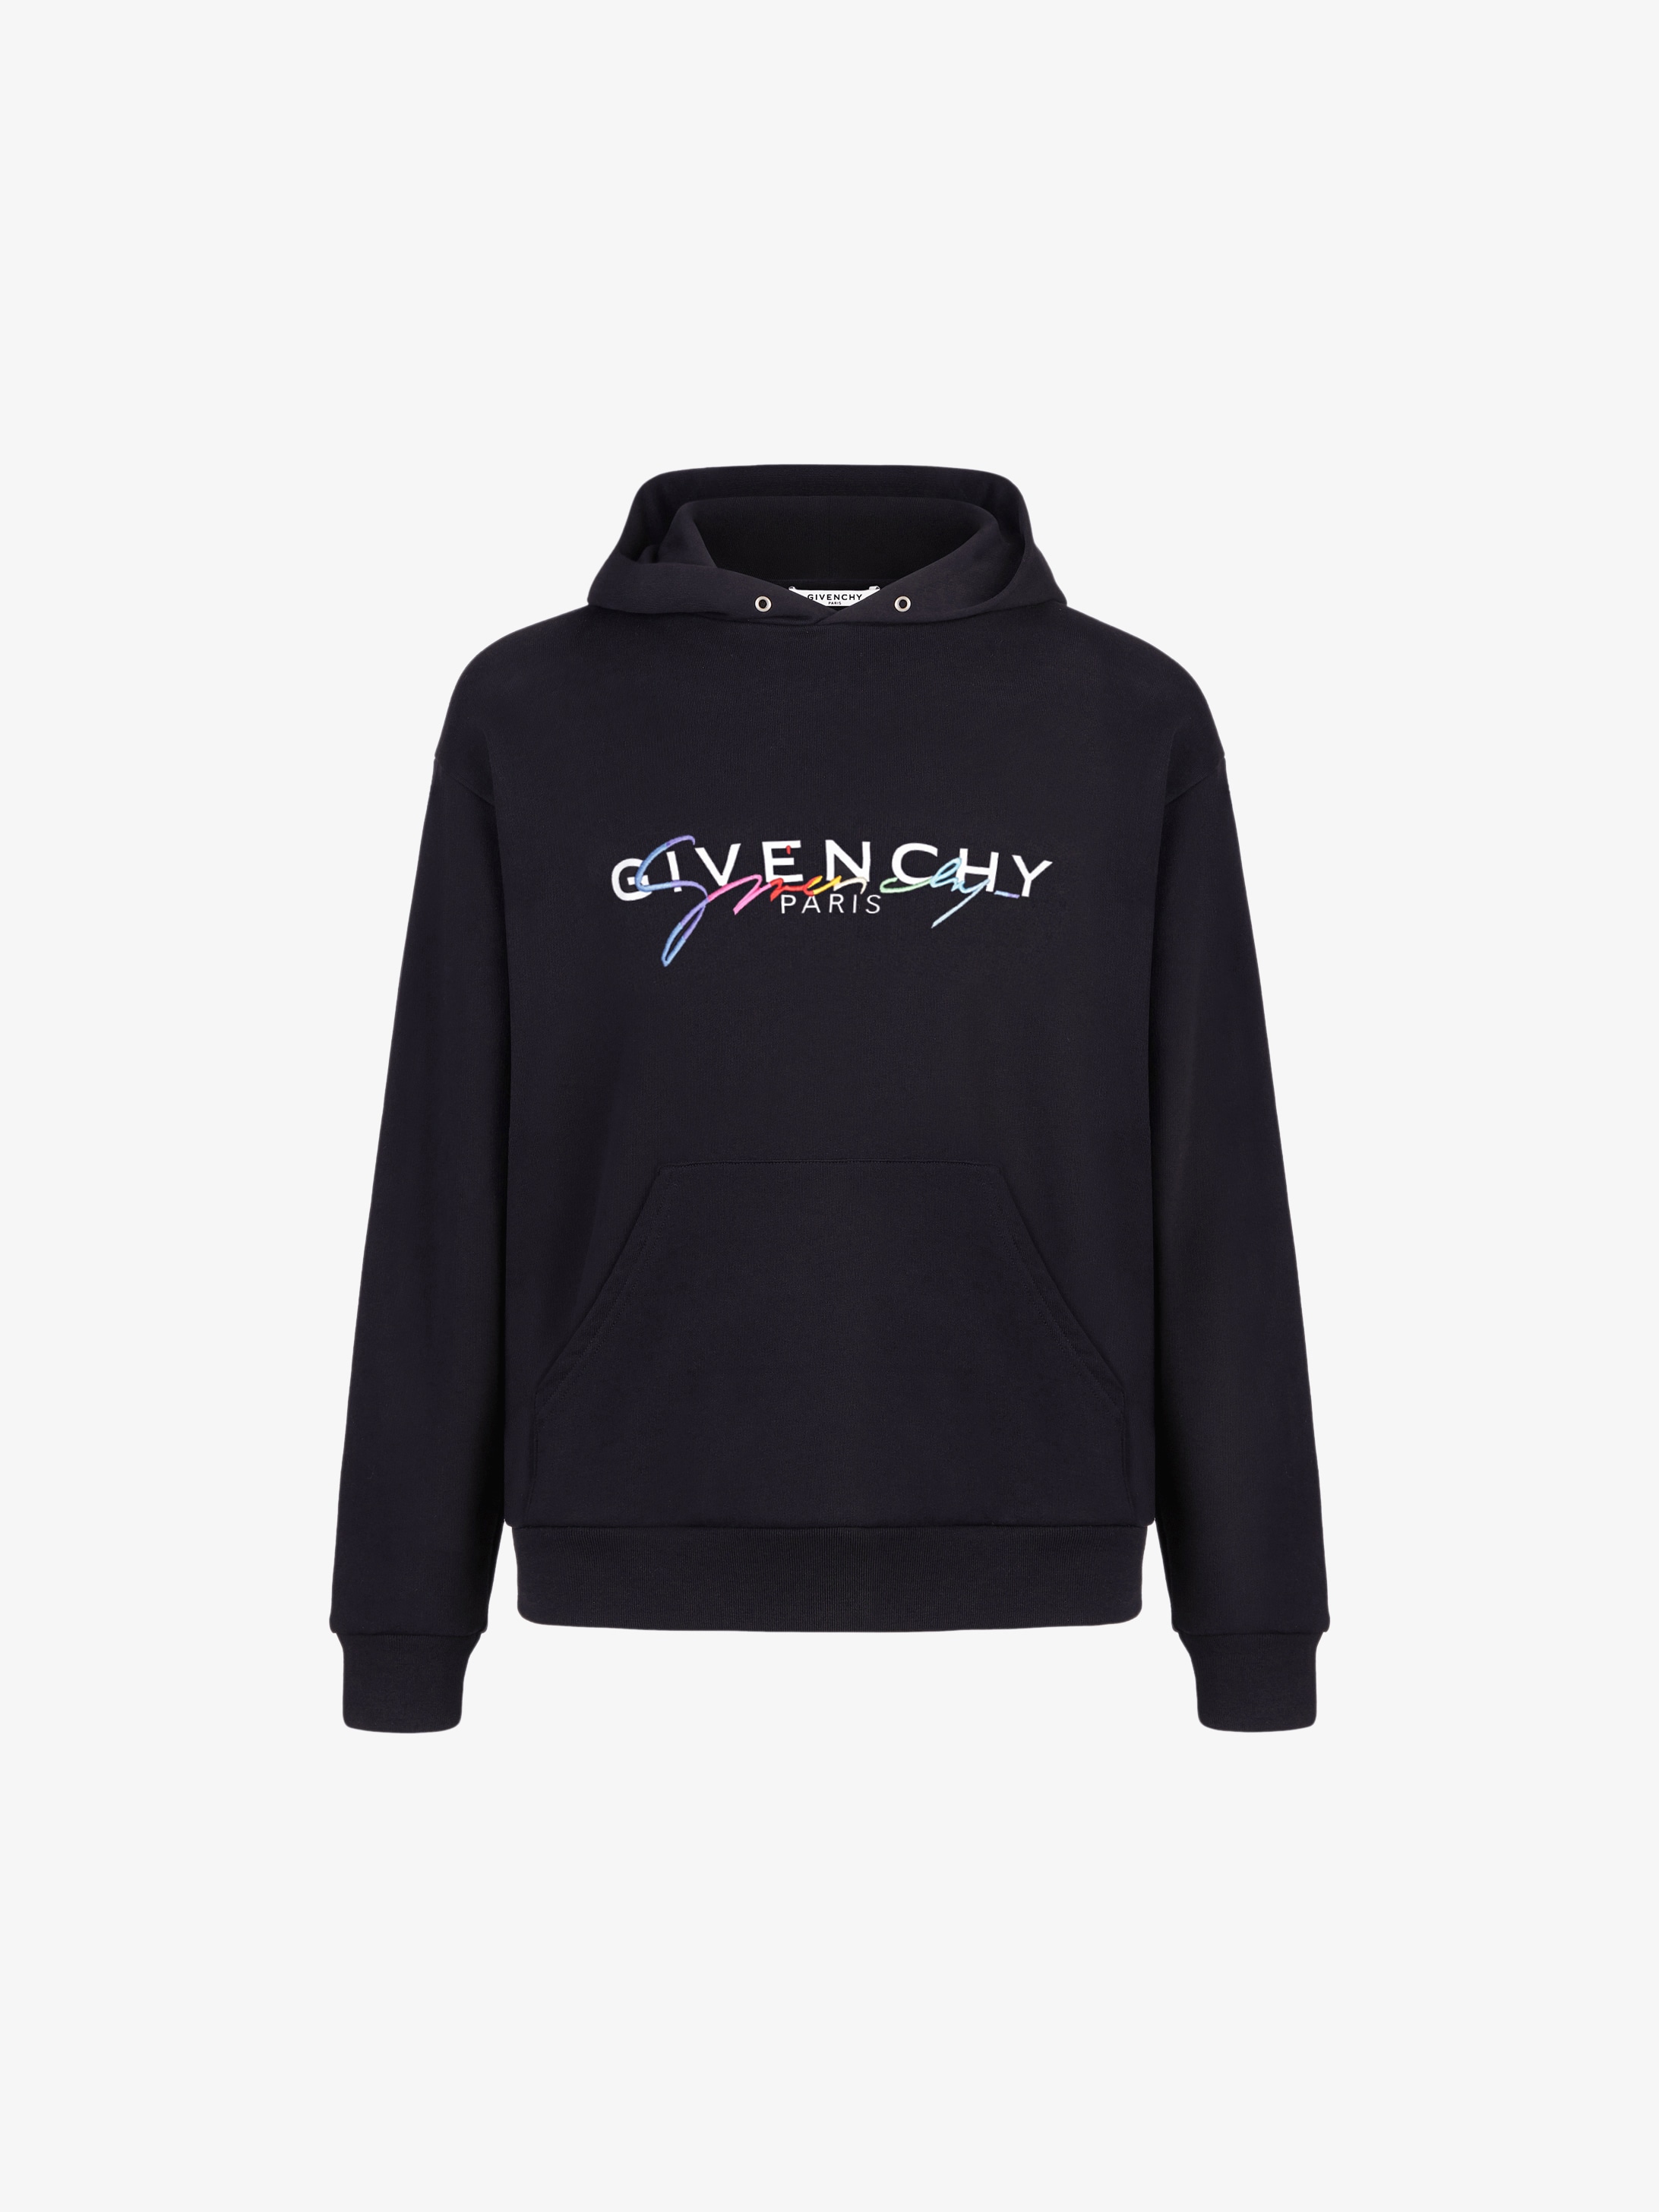 GIVENCHY signature hoodie | GIVENCHY Paris